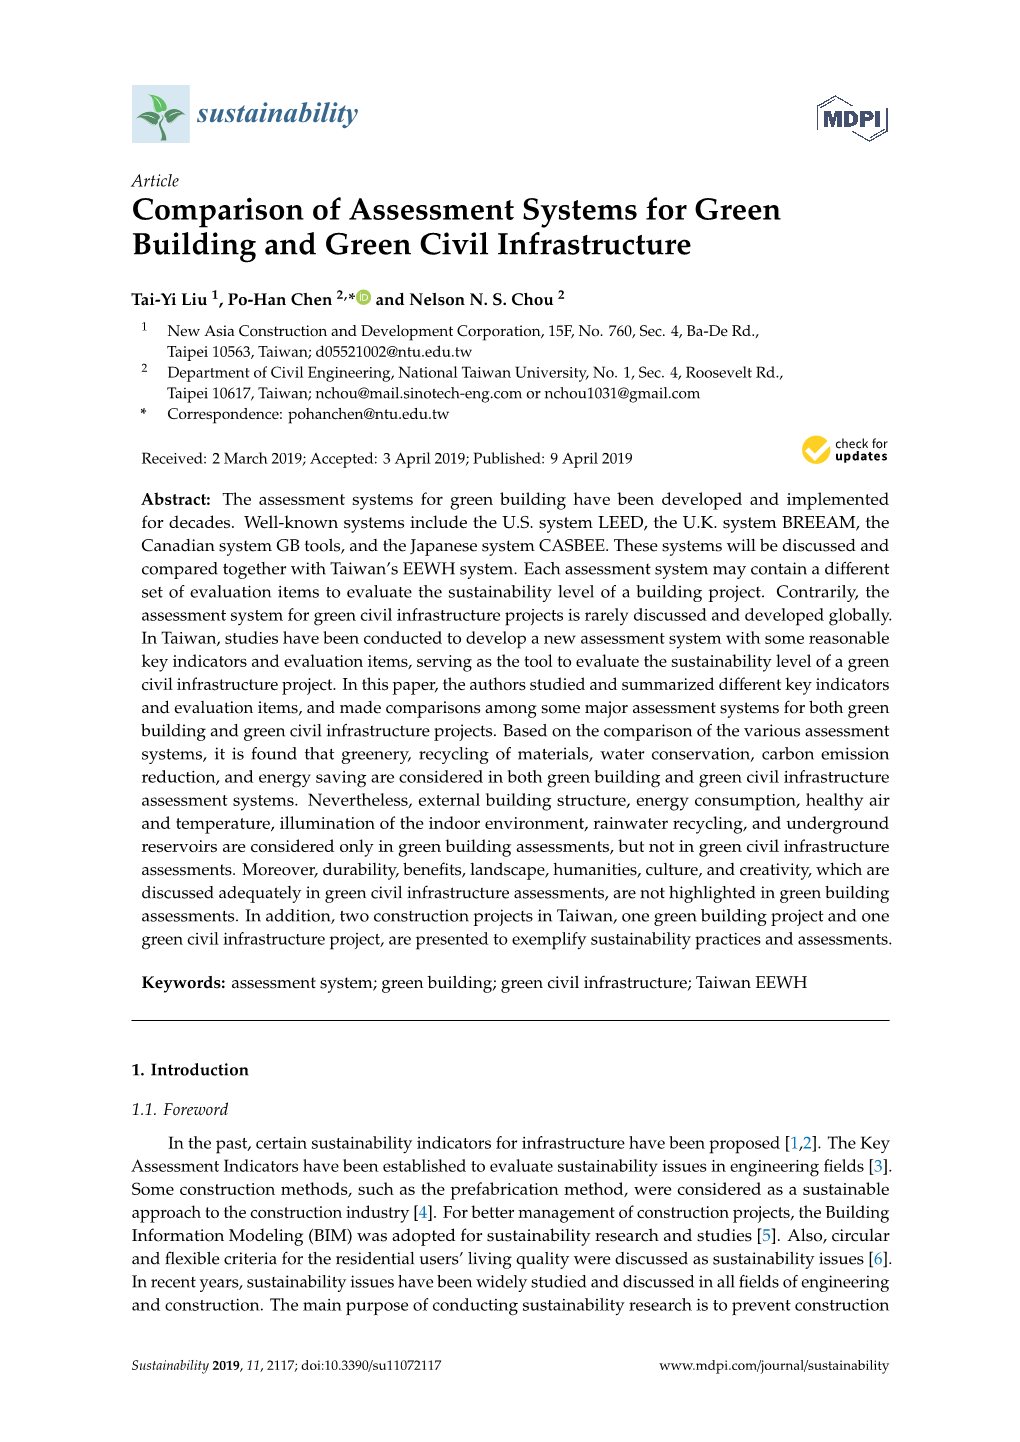 Comparison of Assessment Systems for Green Building and Green Civil Infrastructure